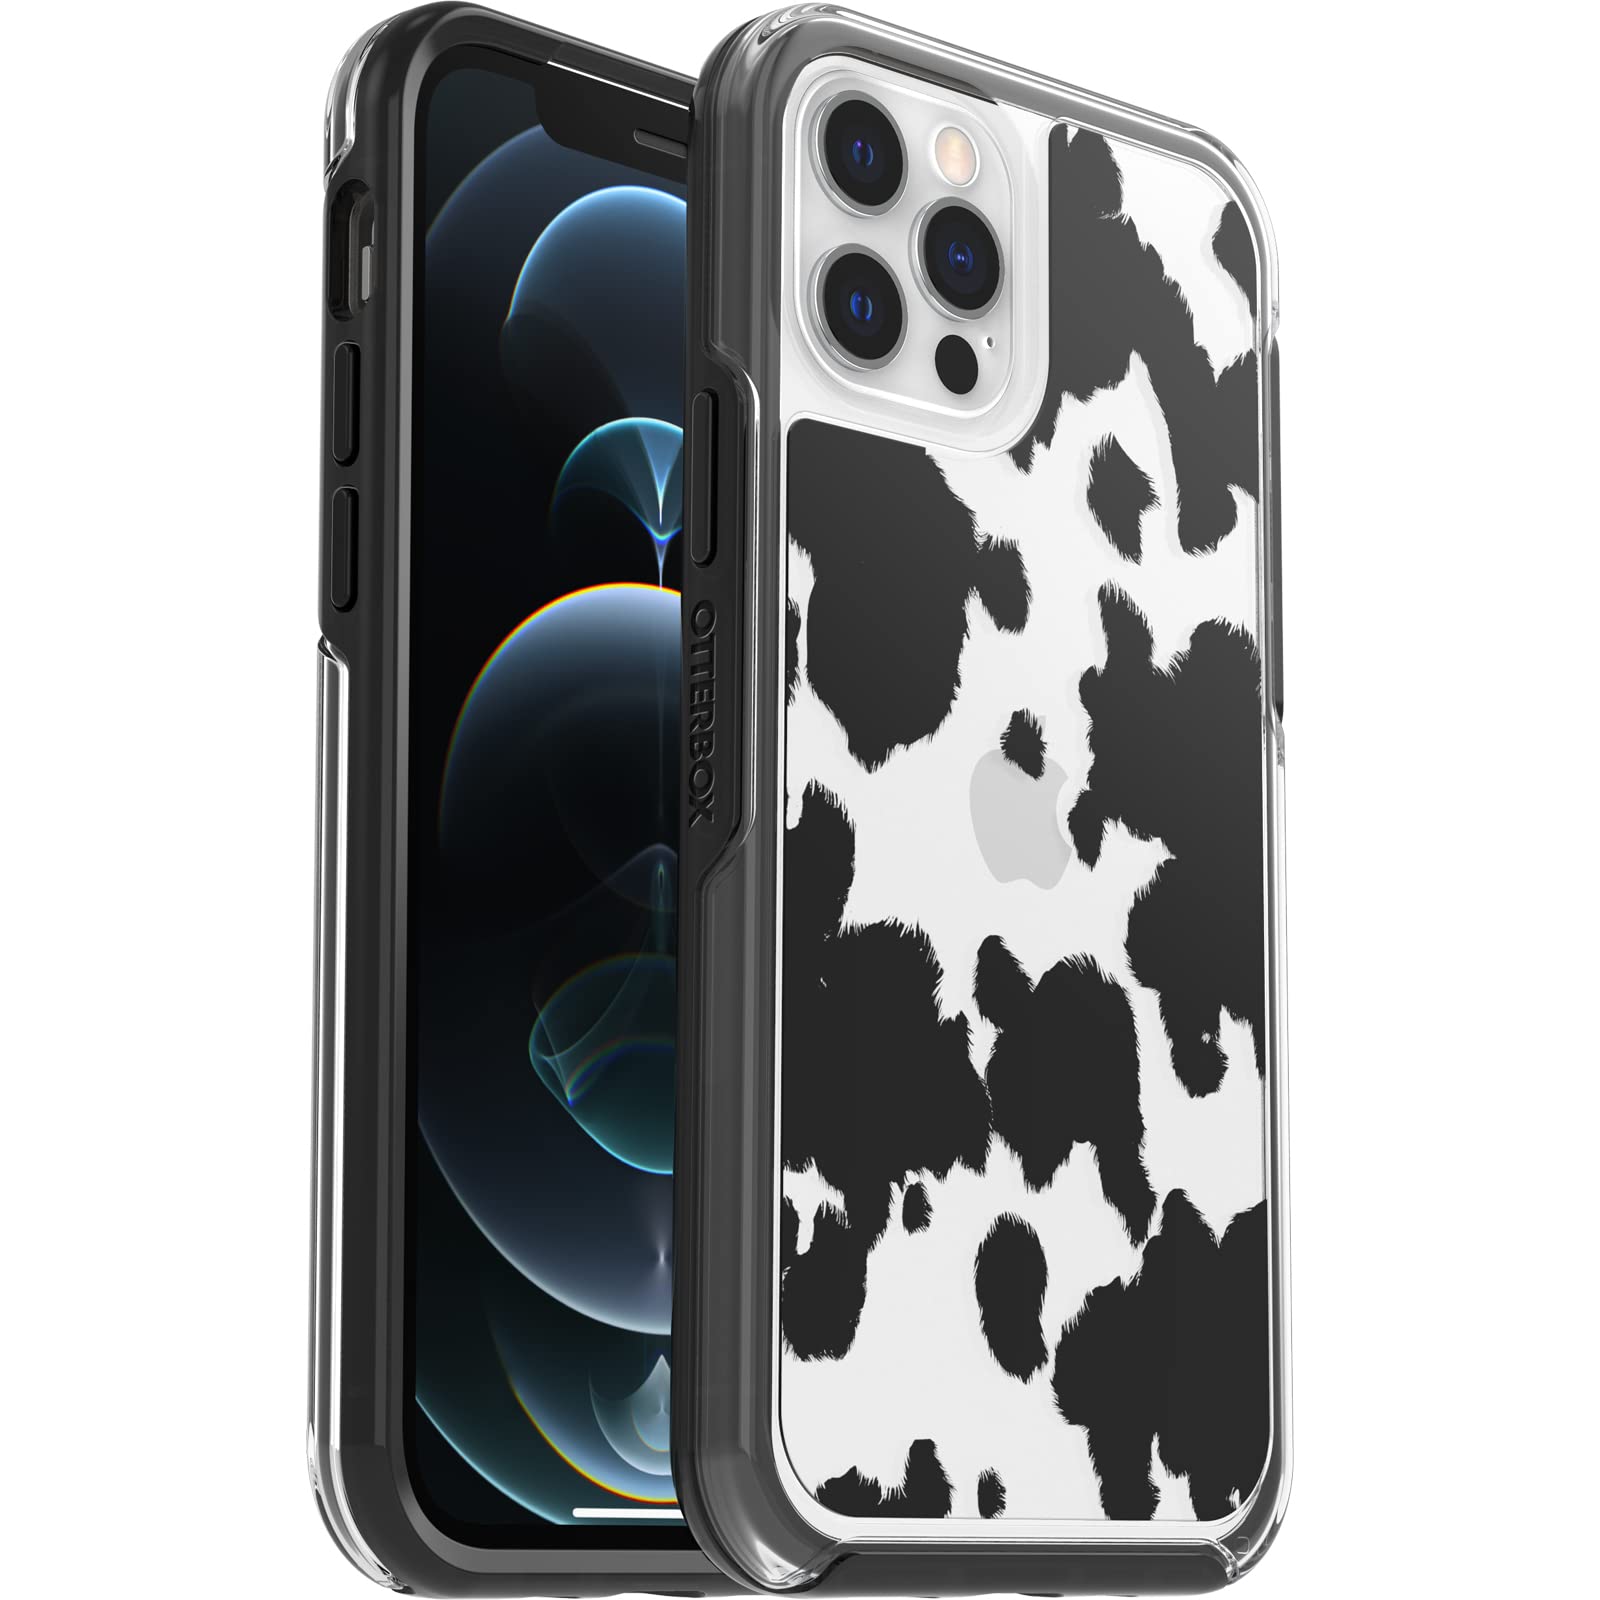 OtterBox SYMMETRY CLEAR SERIES DISNEY Case for iPhone 12 & iPhone 12 Pro - COW PRINT